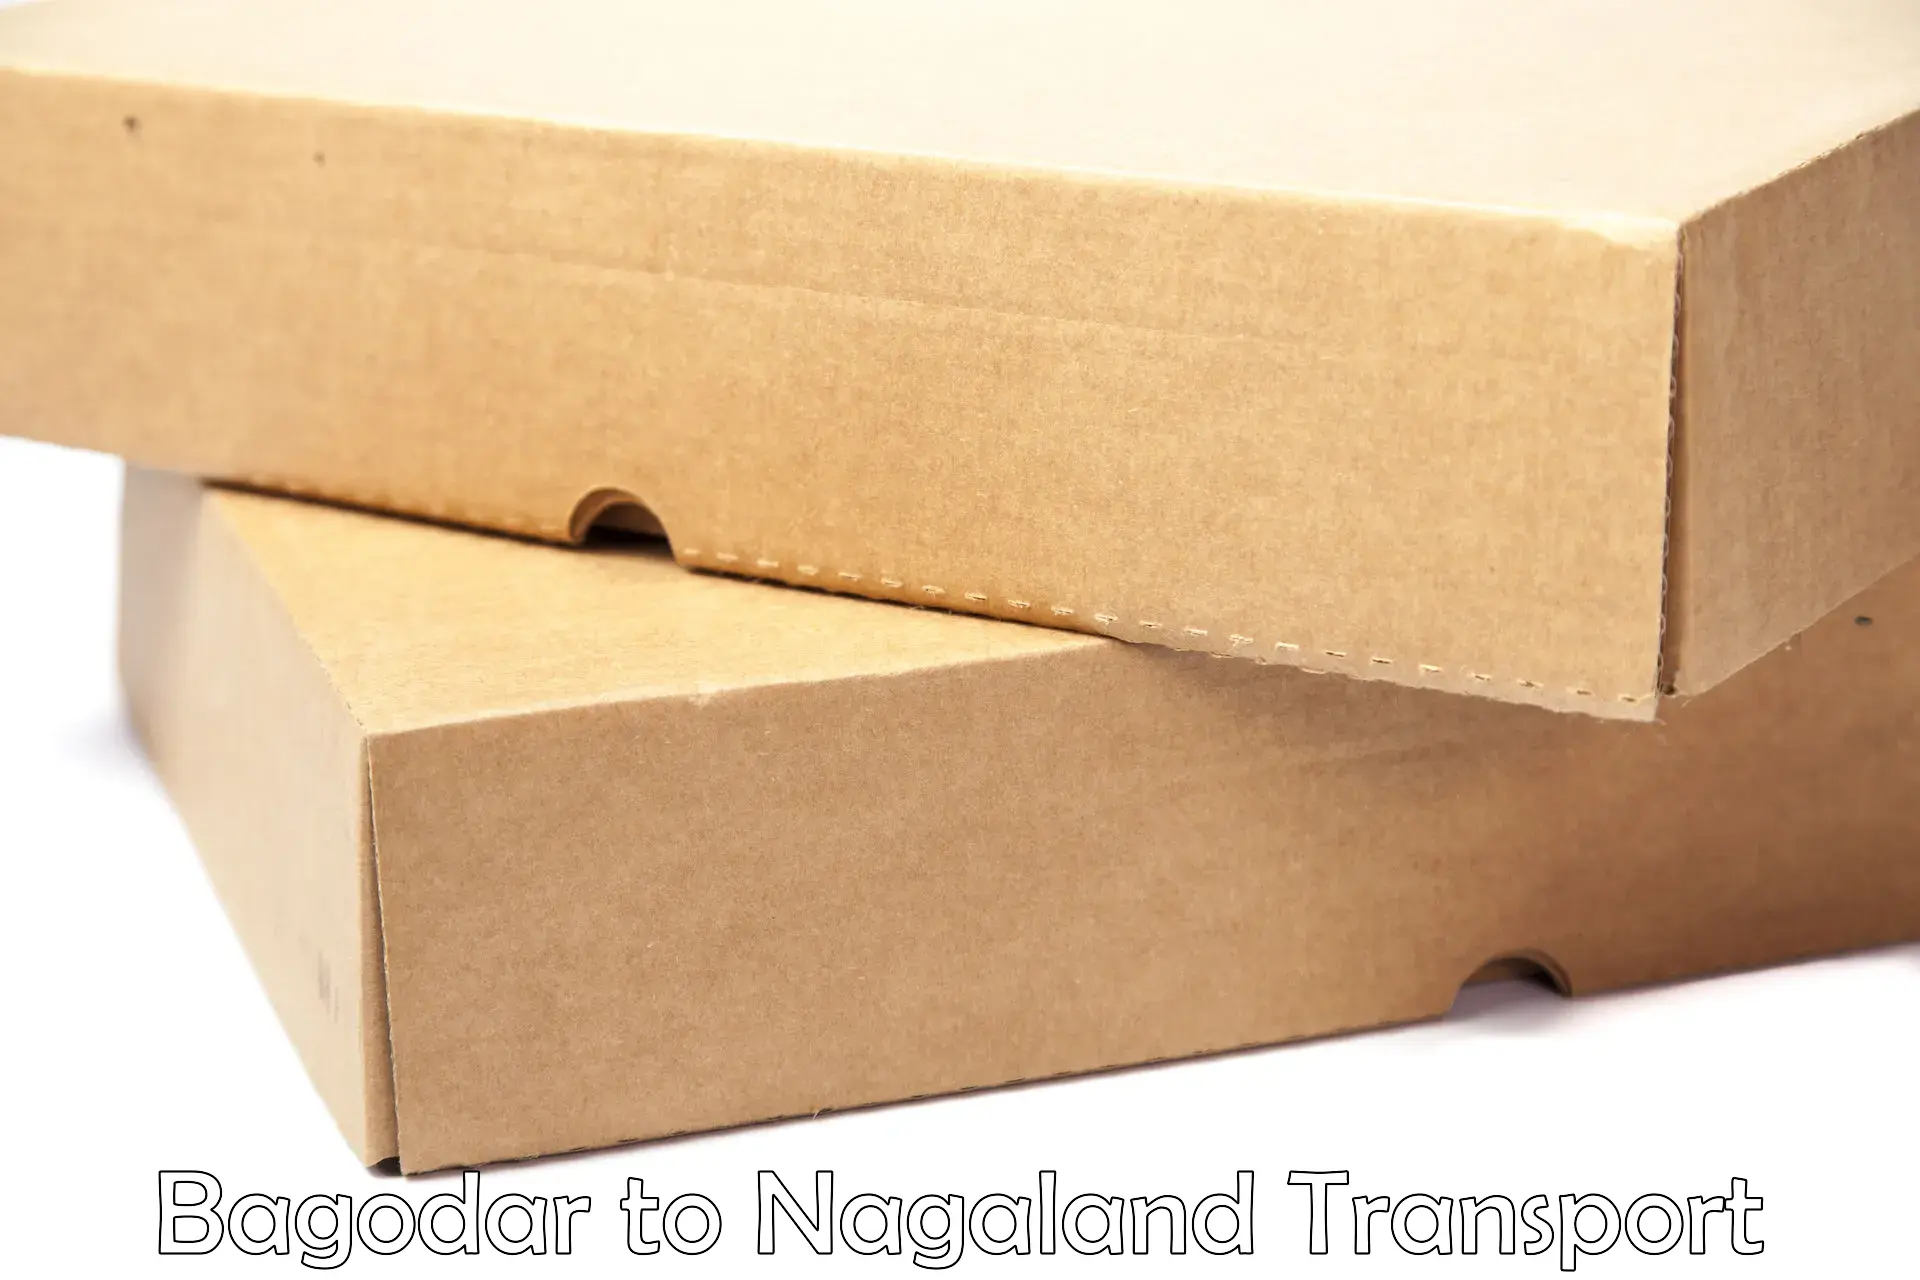 Container transport service in Bagodar to Nagaland